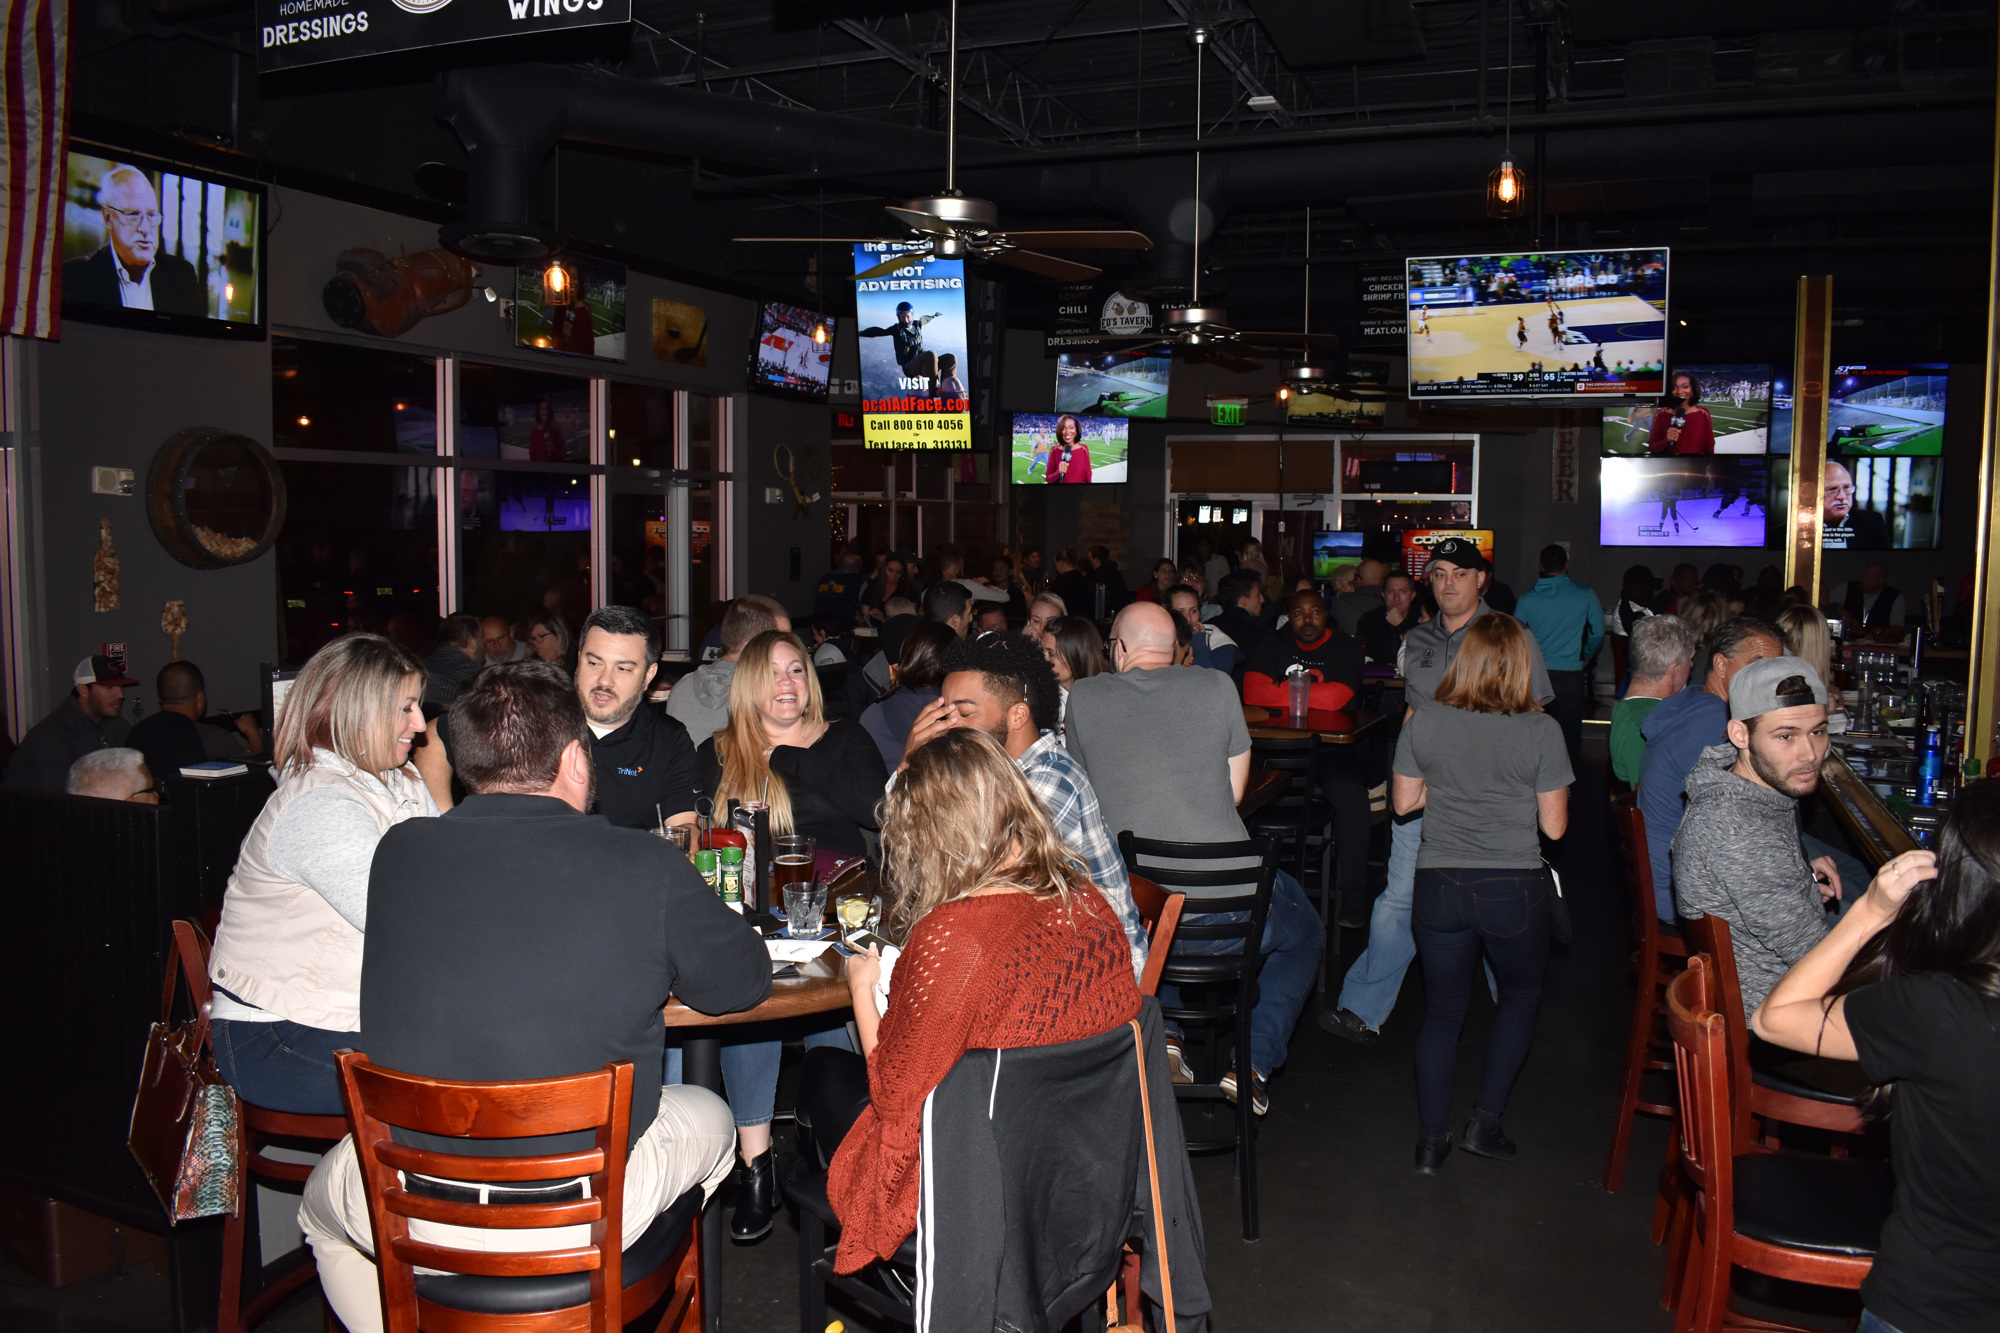 Ed’s Tavern is largely popular for offering music trivia on Wednesday night and general trivia on Thursday night. Photo by Niki Kottmann